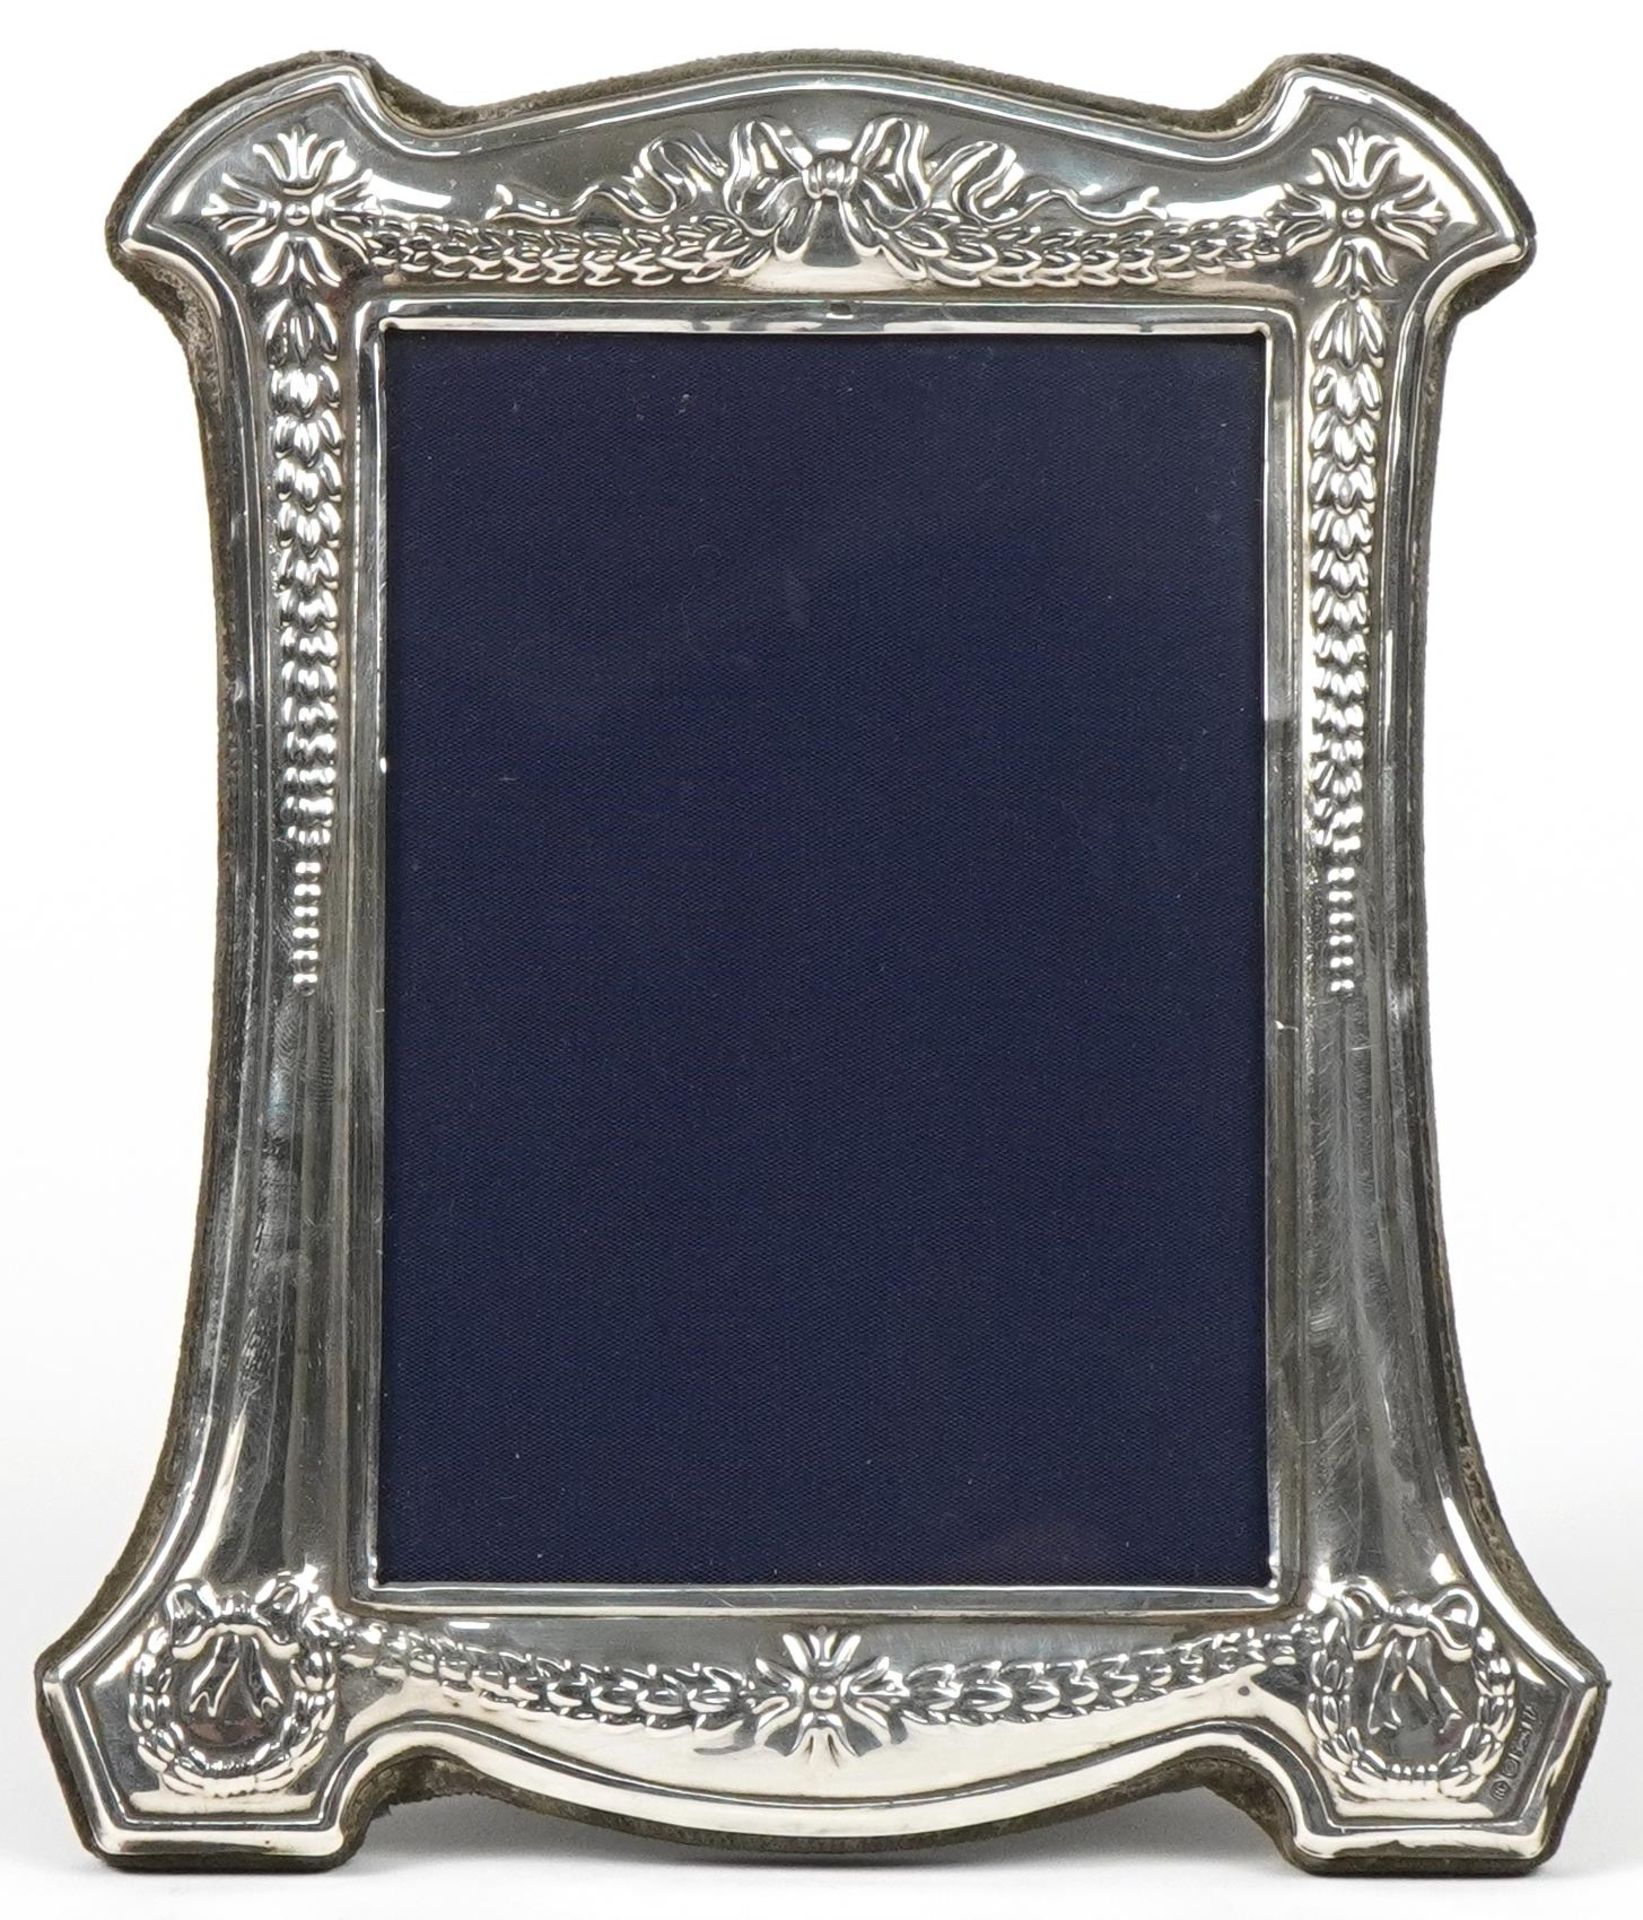 Carrs, Elizabeth II silver easel photo frame embossed with swags and flowers, Sheffield 1995, 18cm x